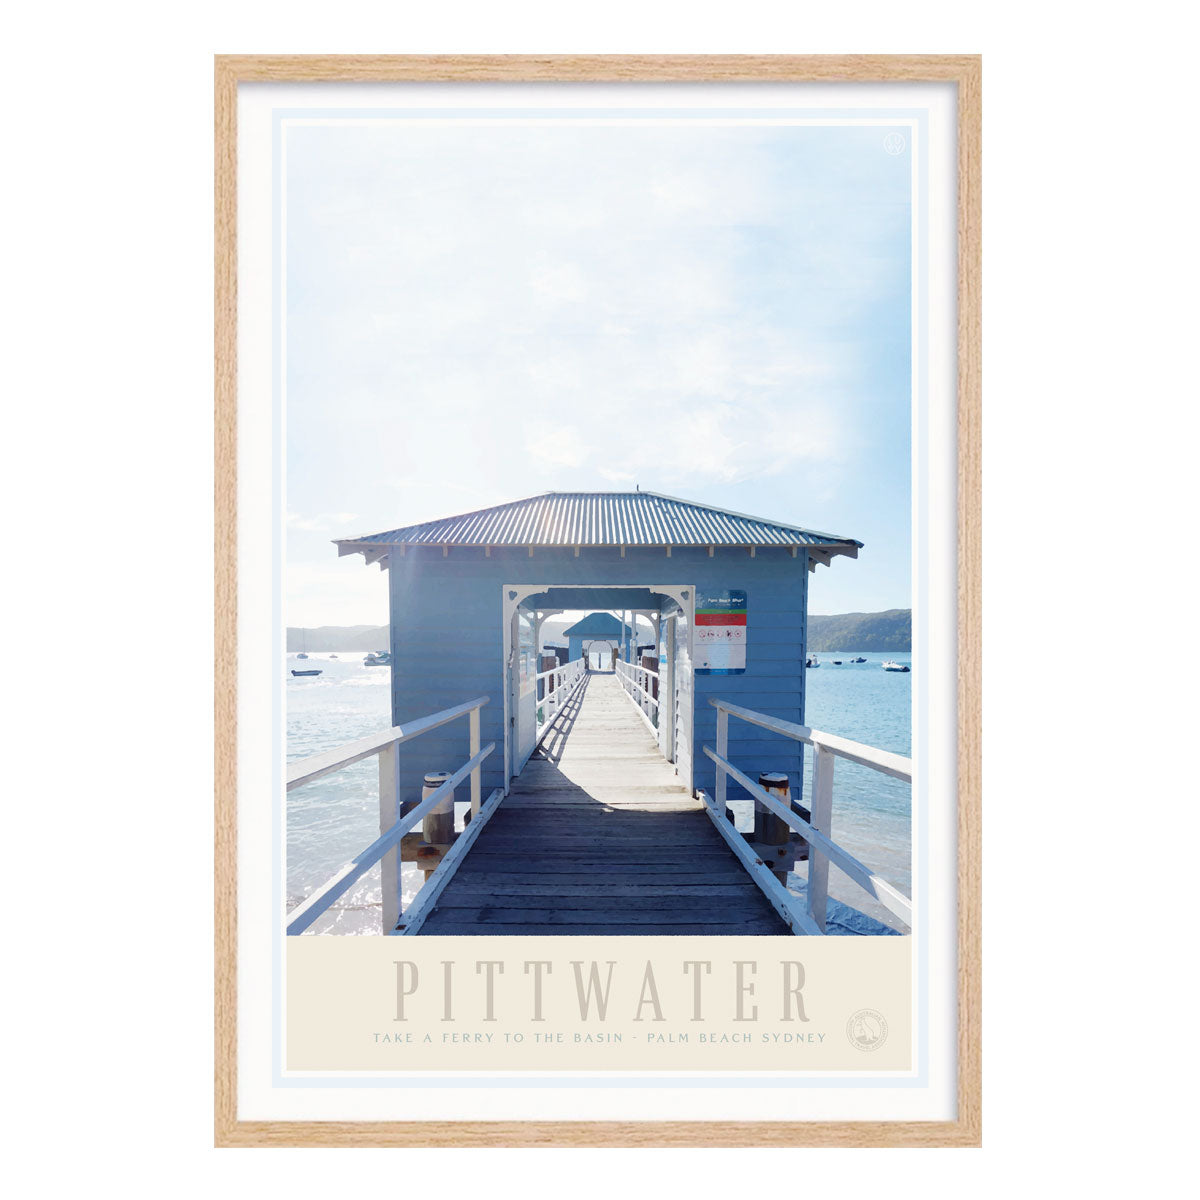 Pittwater Sydney Ferry print. Vintage retro travel poster print in oak frame from Places We Luv